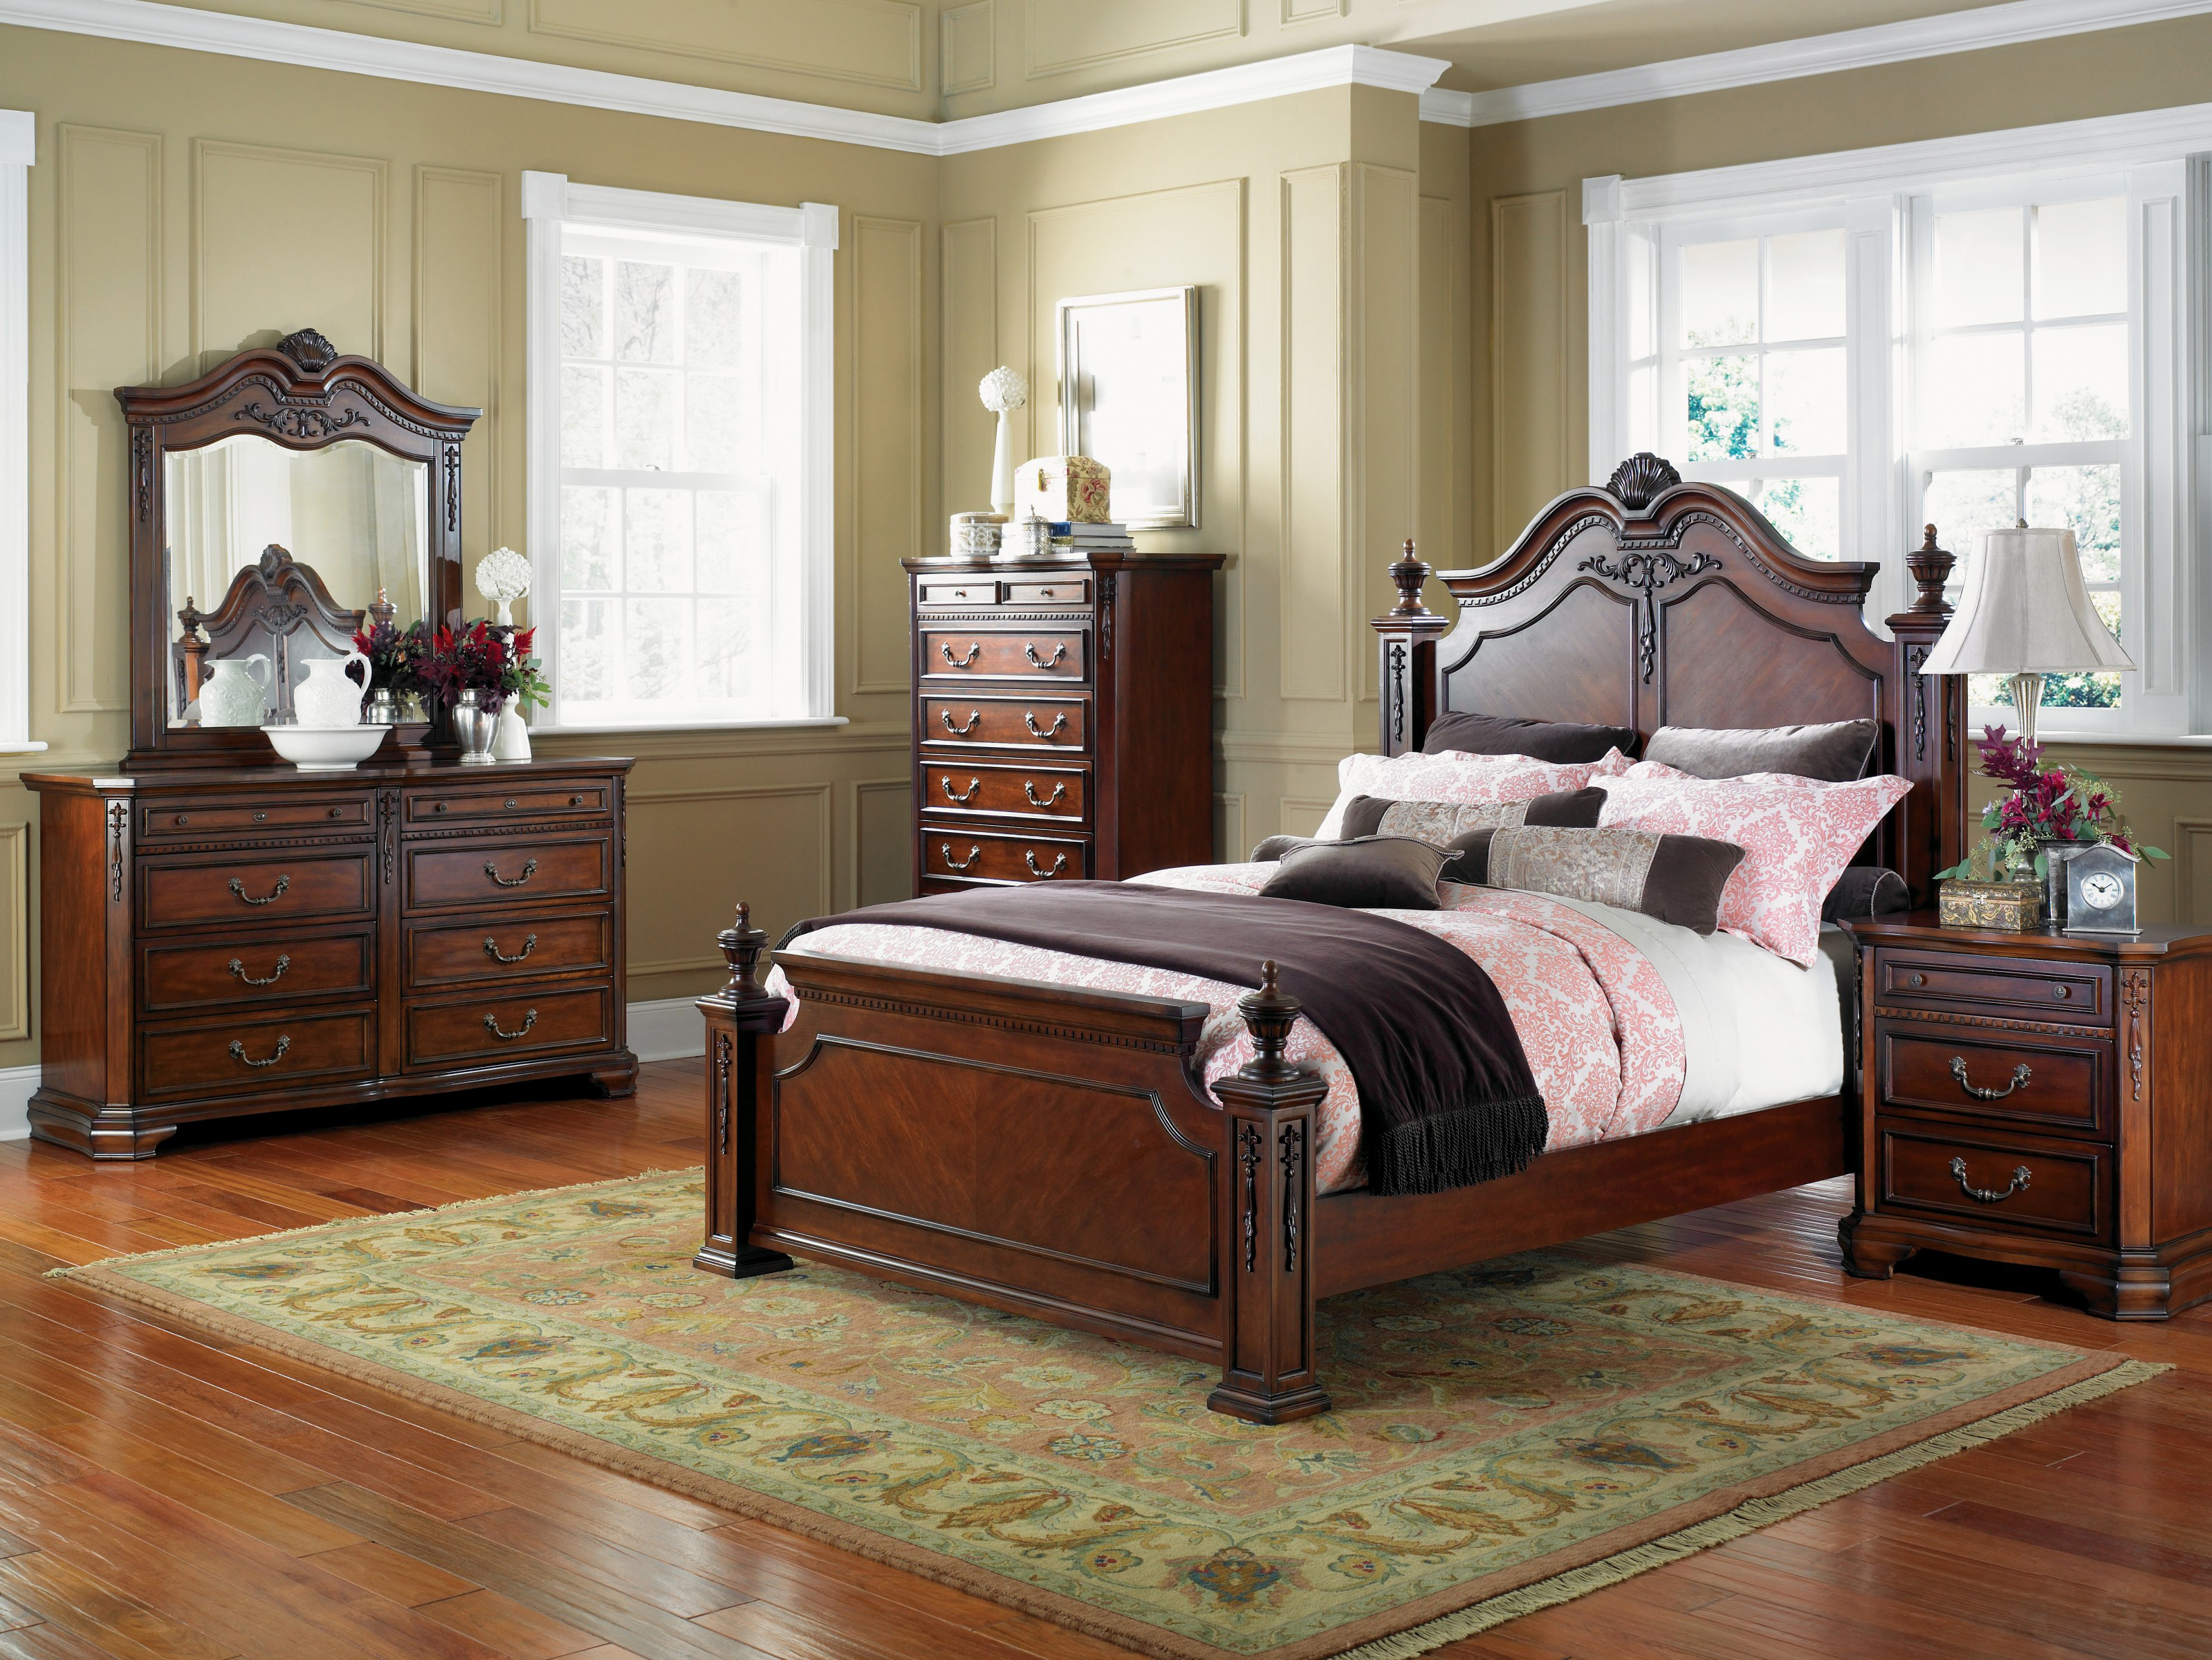 Bedroom Furniture Couch photo - 2